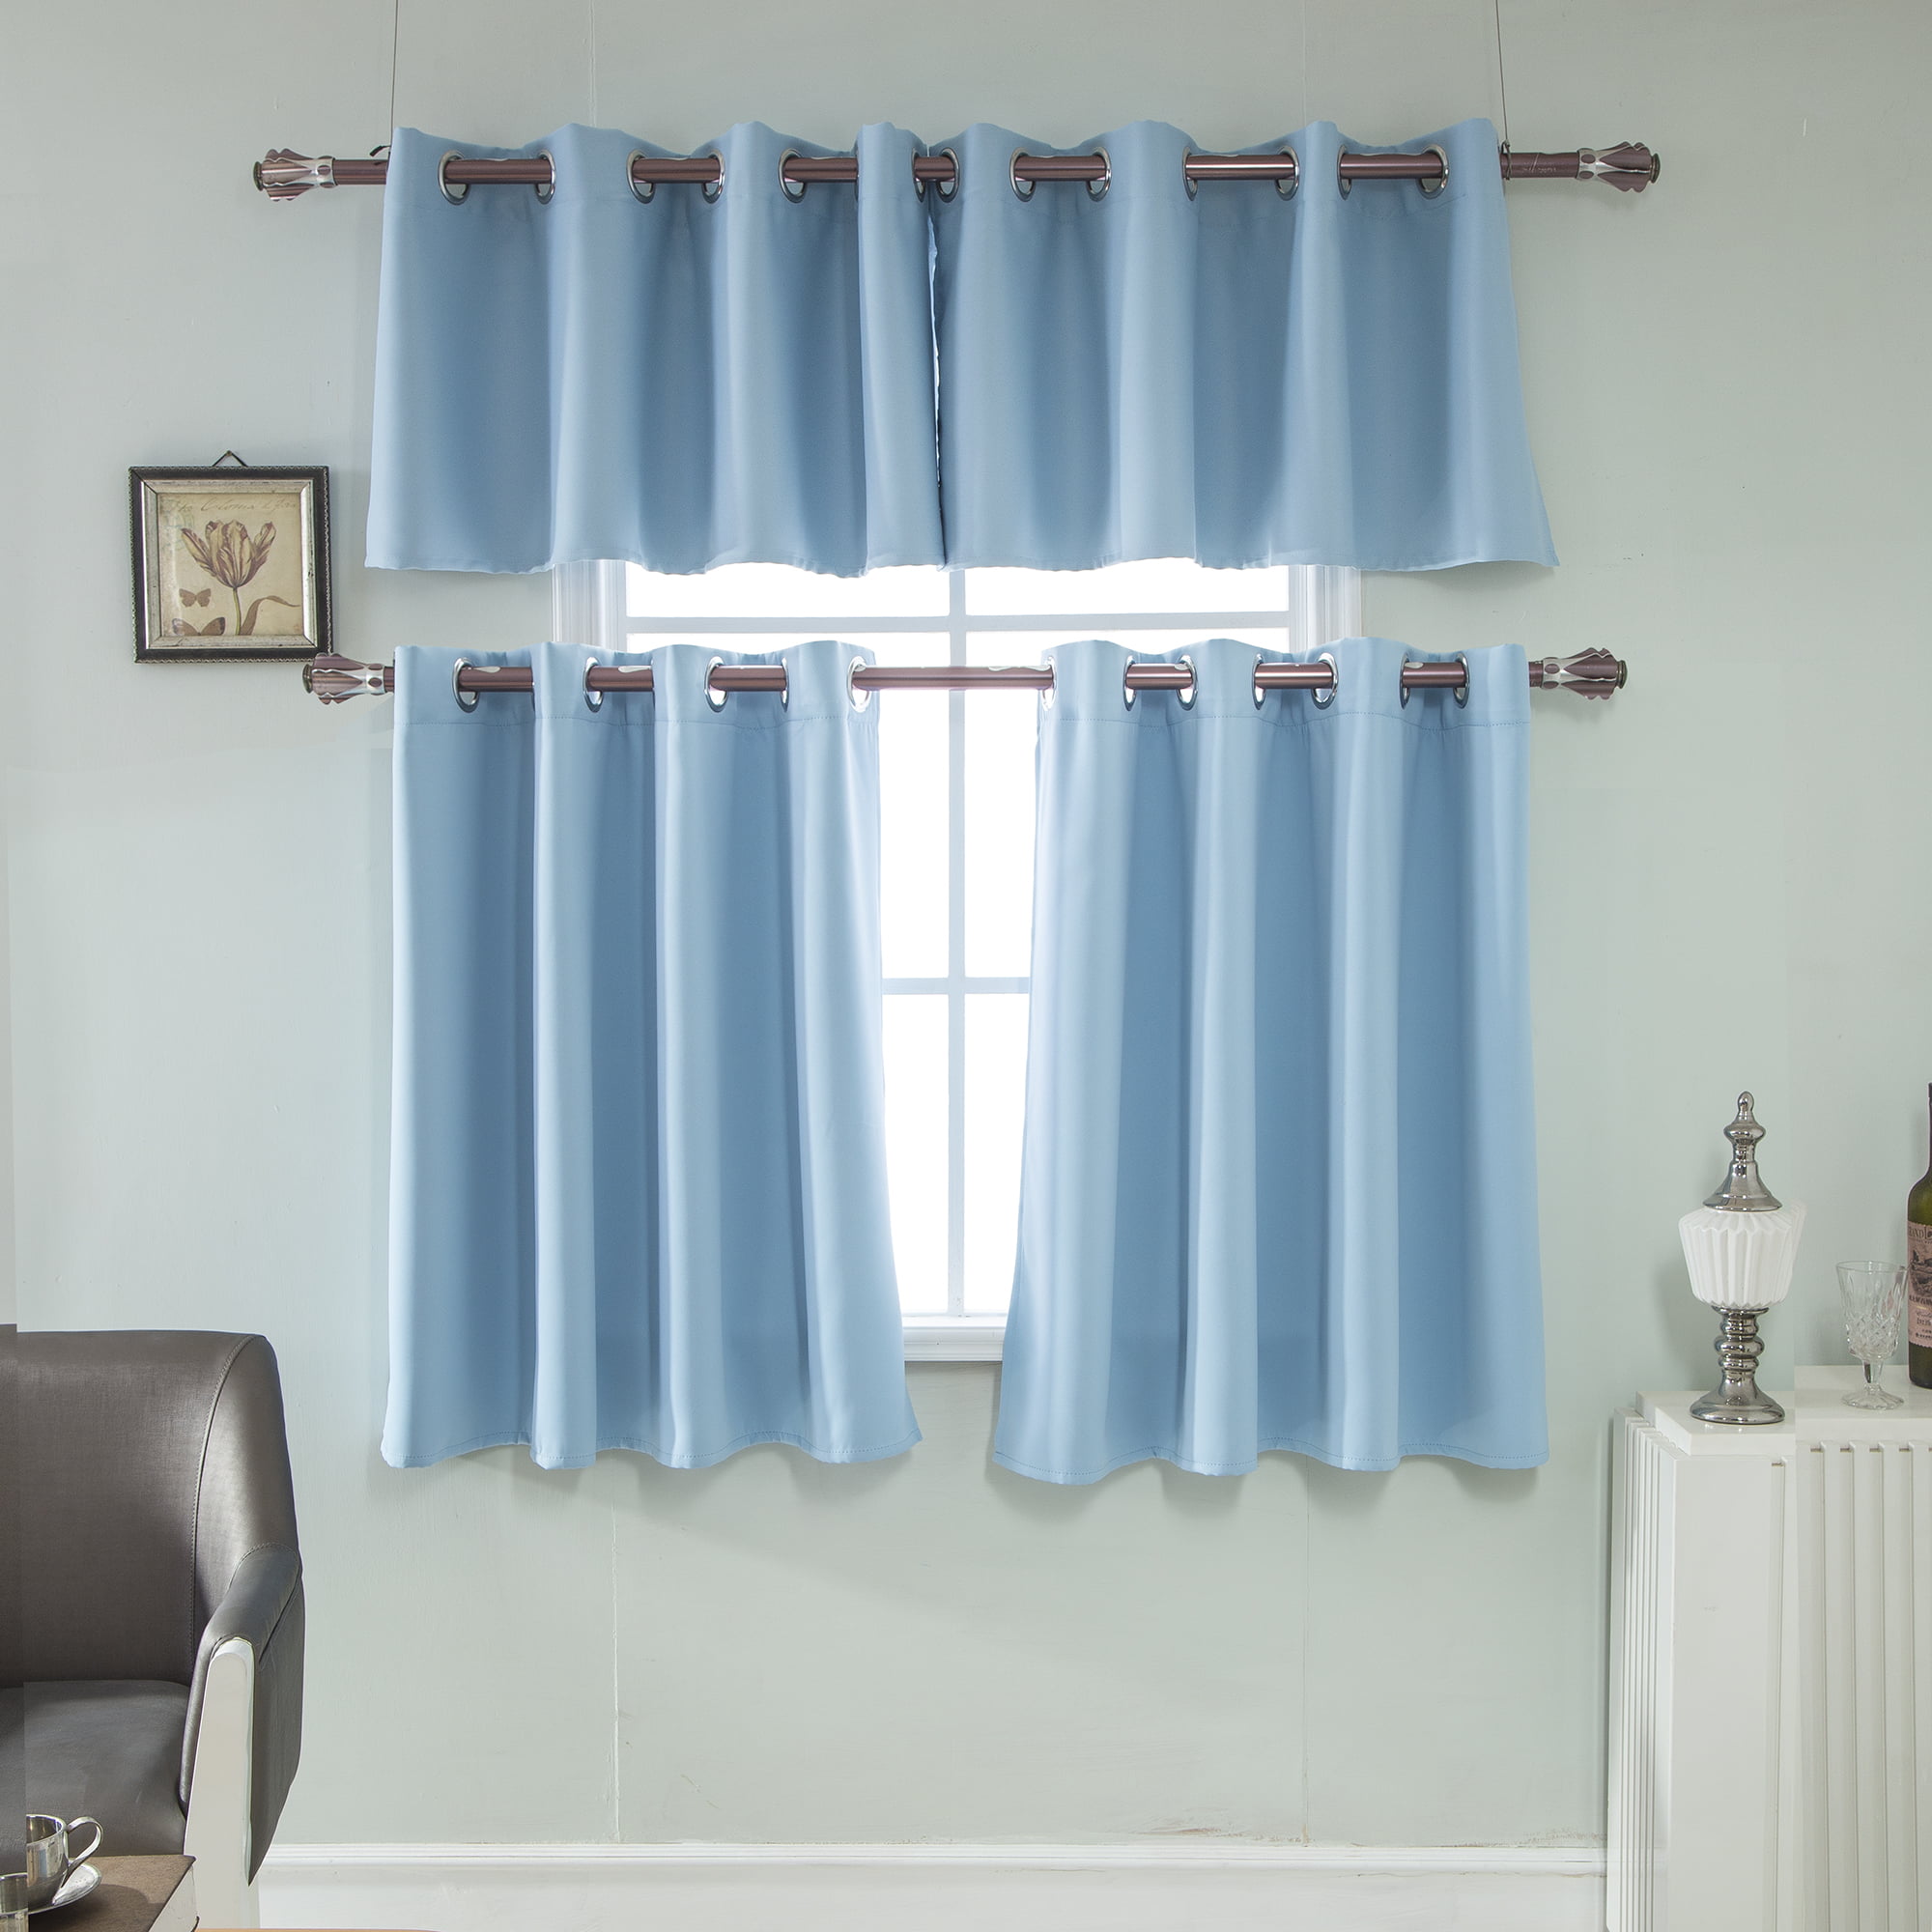 Ring Top Thermal Insulated Blackout Small Window Curtain For Bedroom Kitchen New 